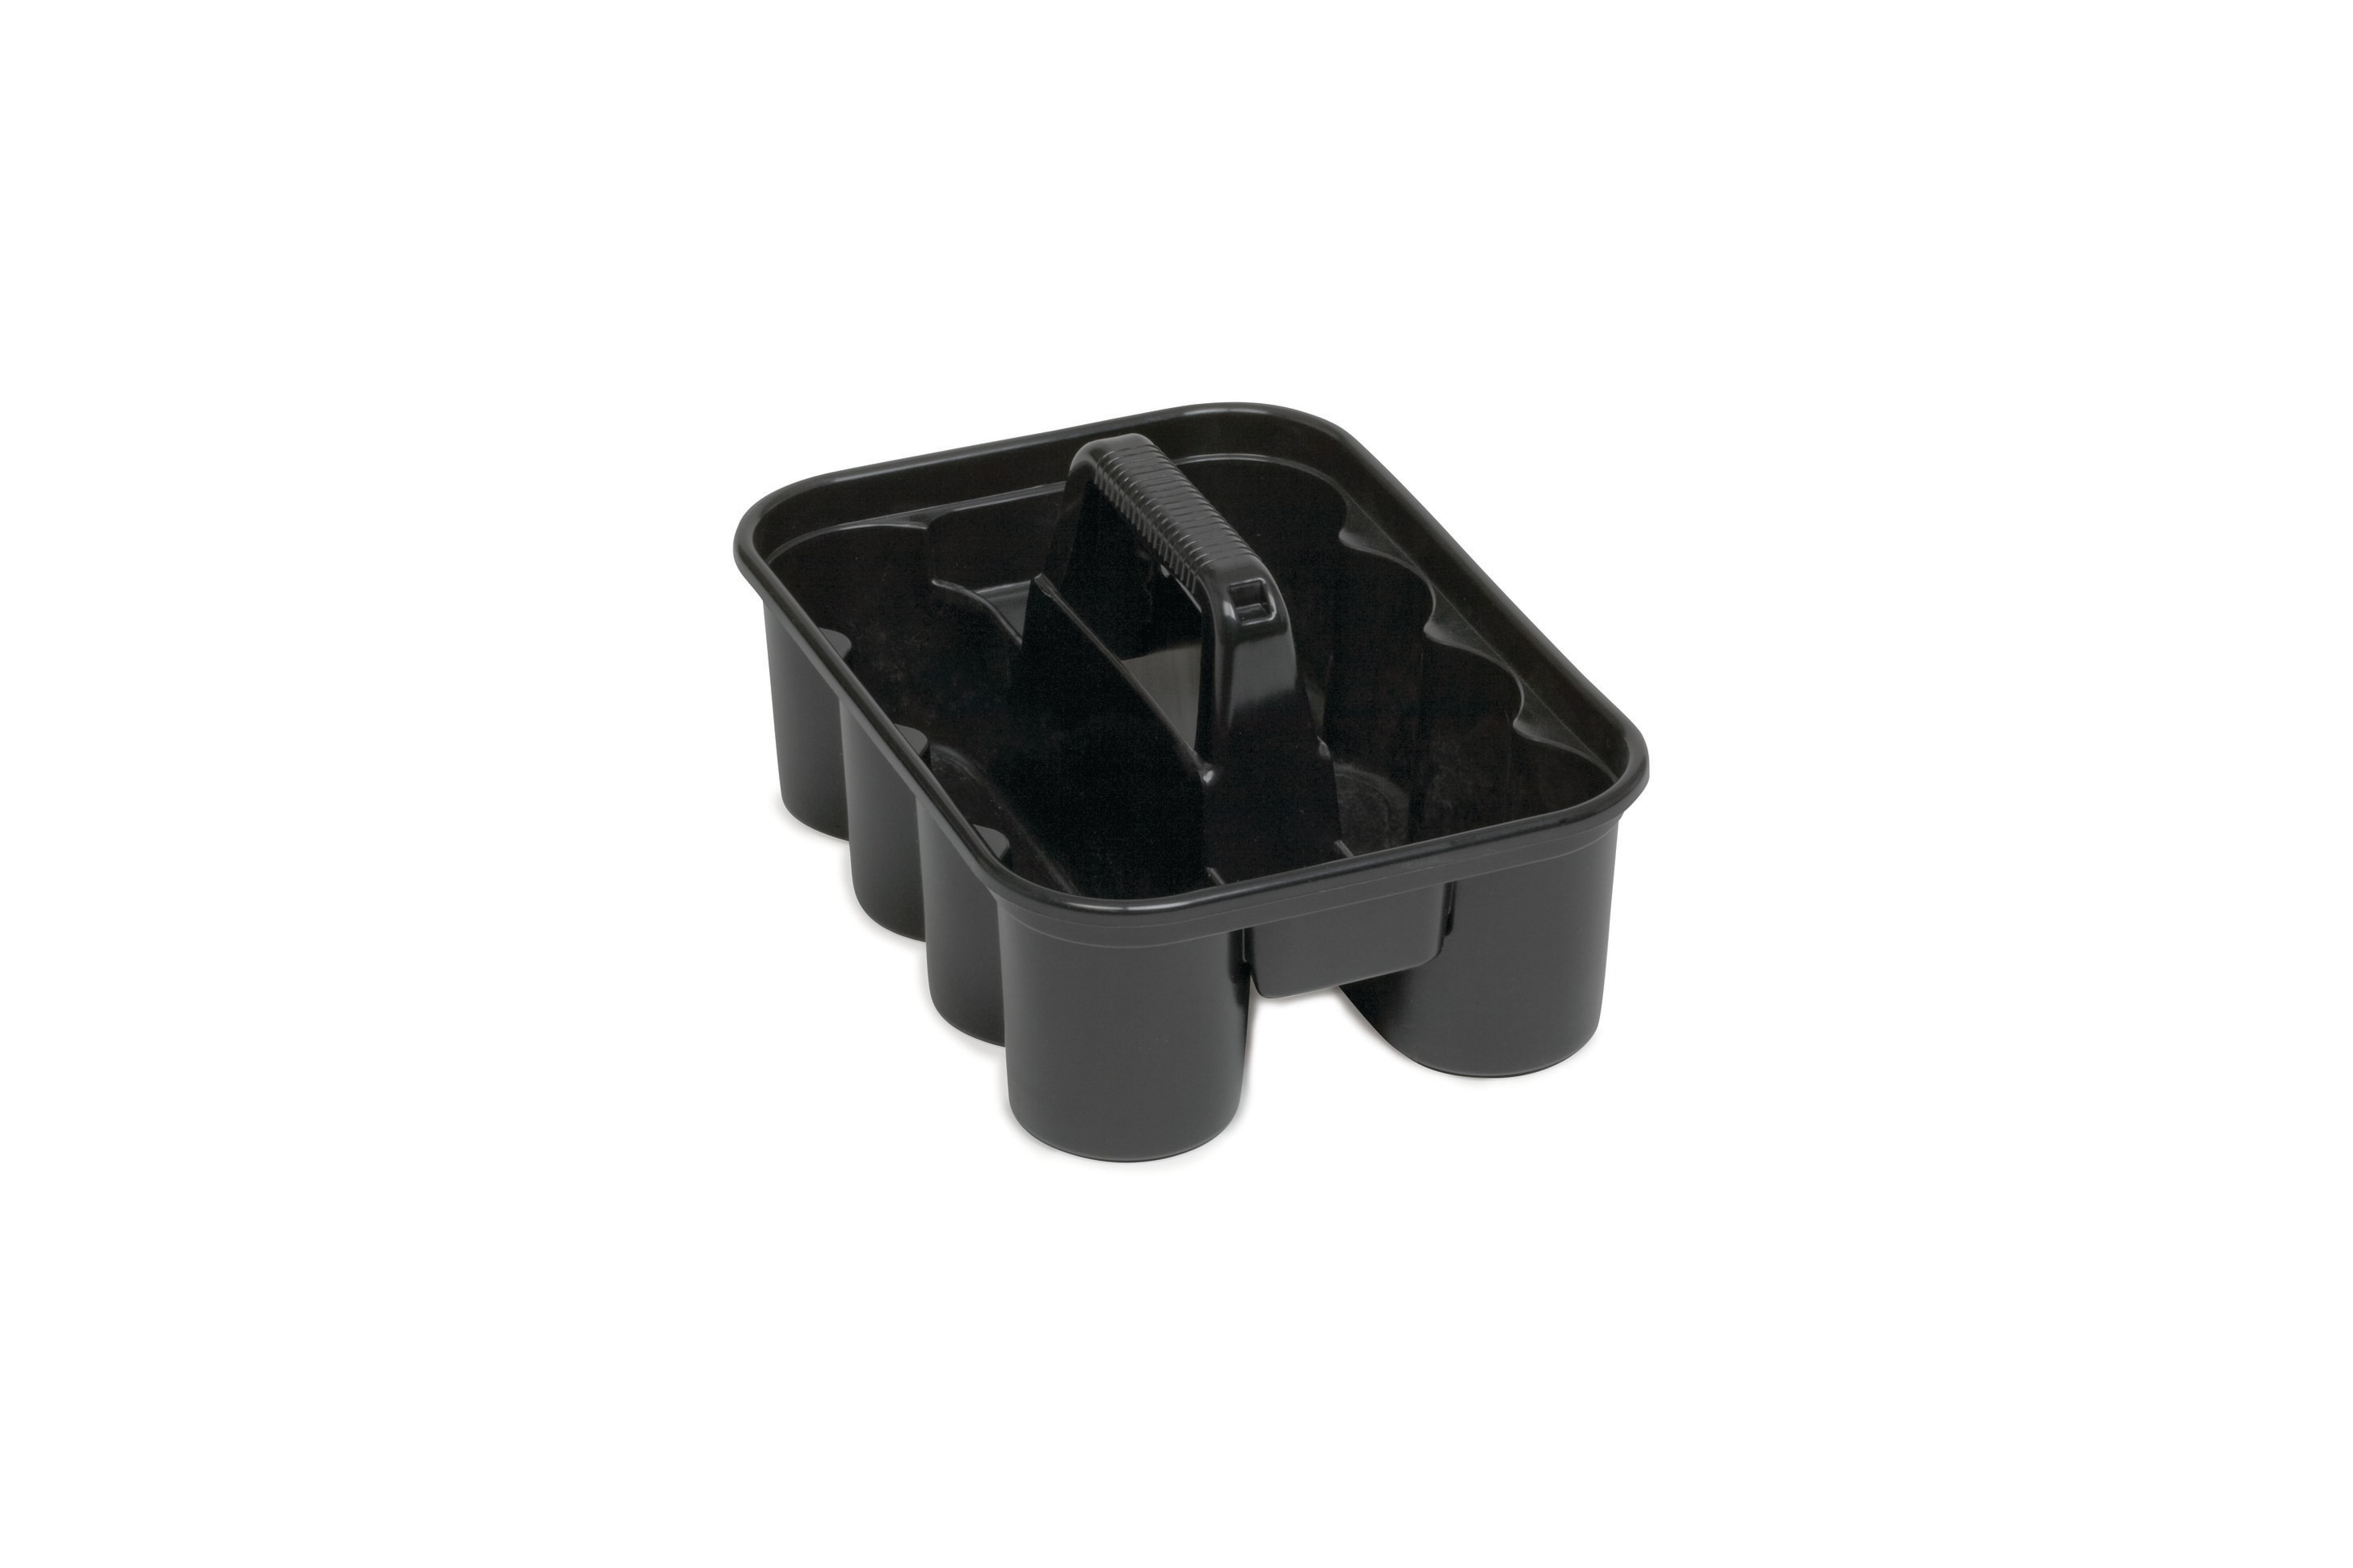 Maid Caddy Black -   Janitorial Supplies & Equipment